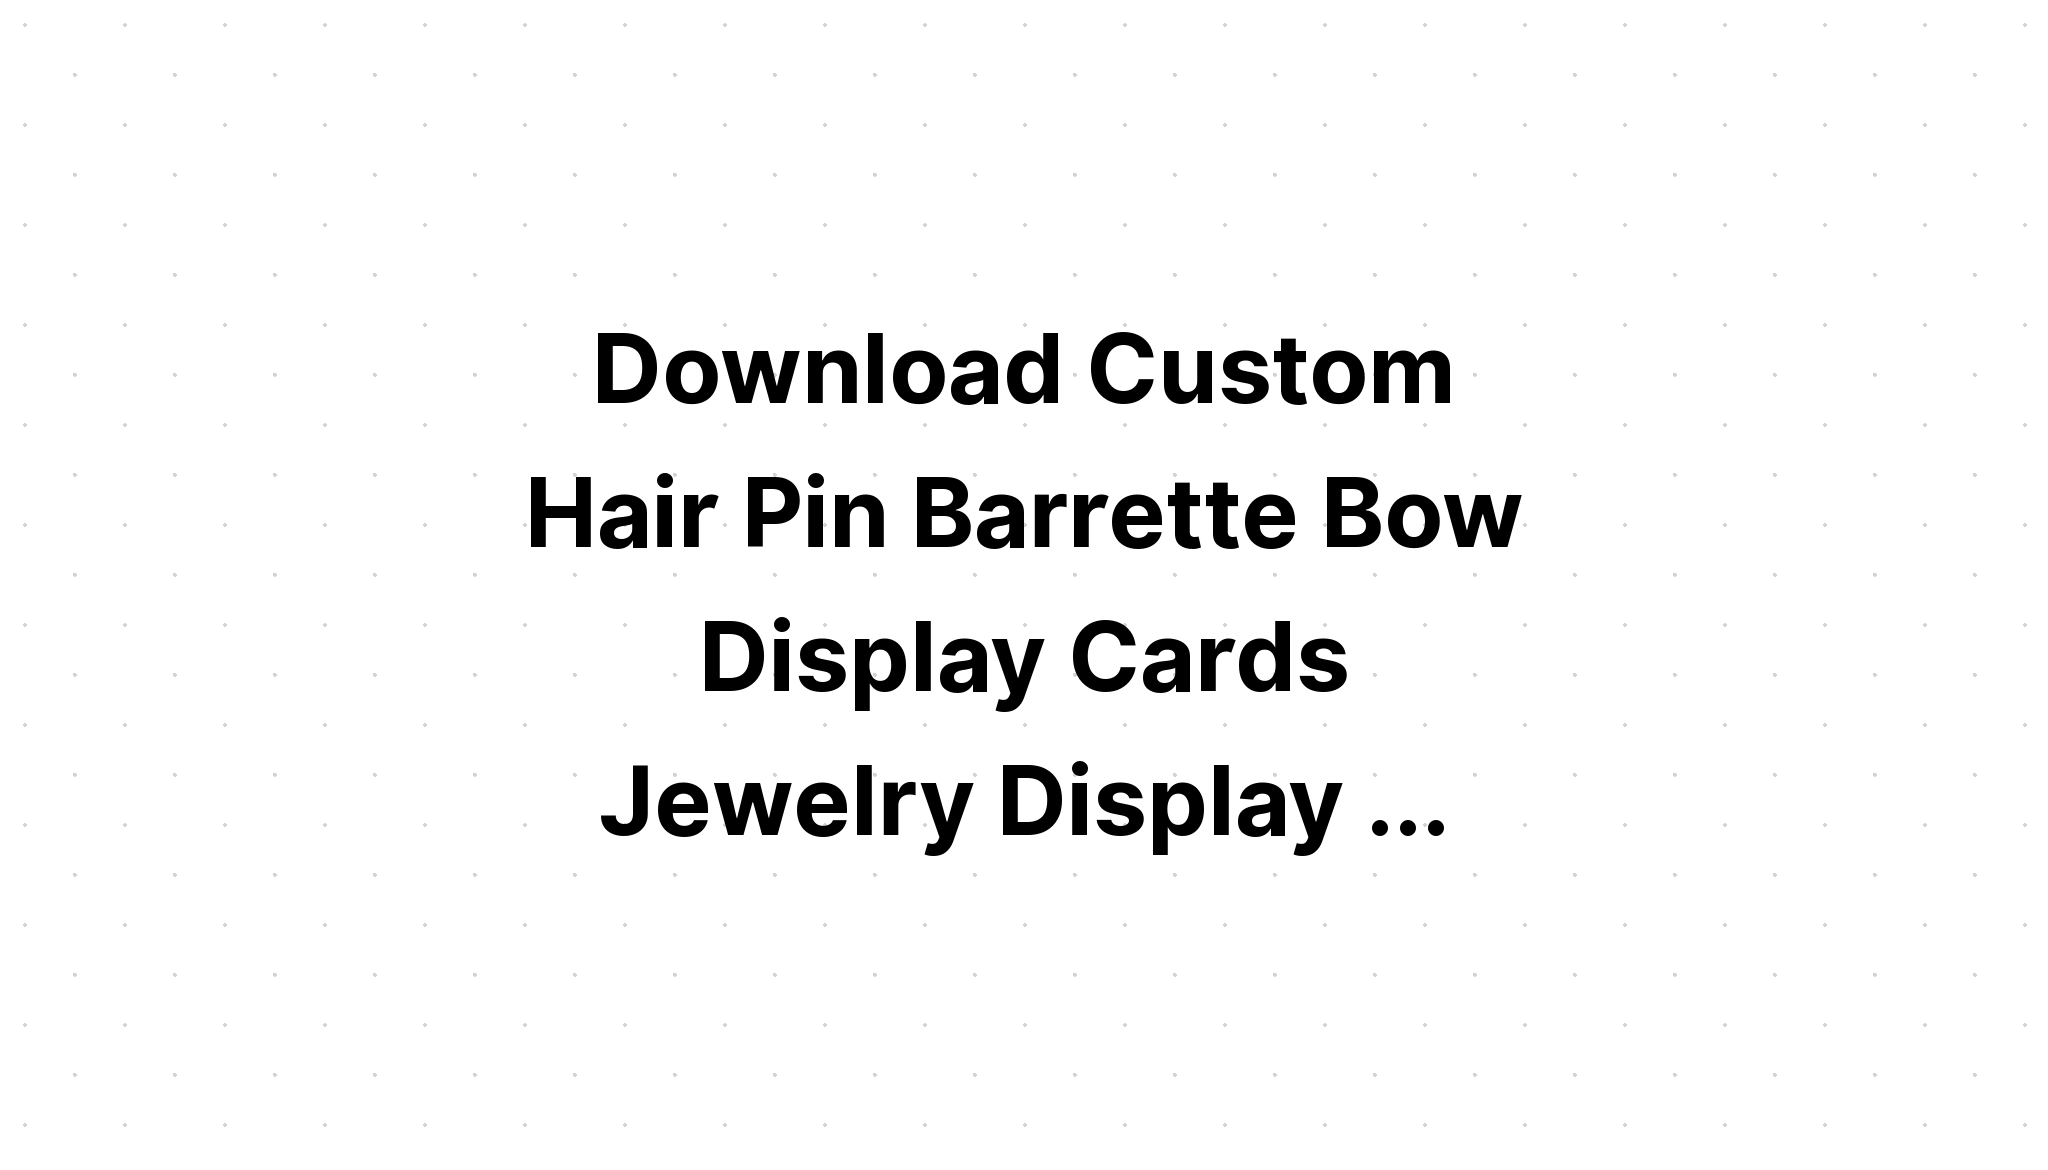 Download Hair Bow Display Cards With Or Without SVG File